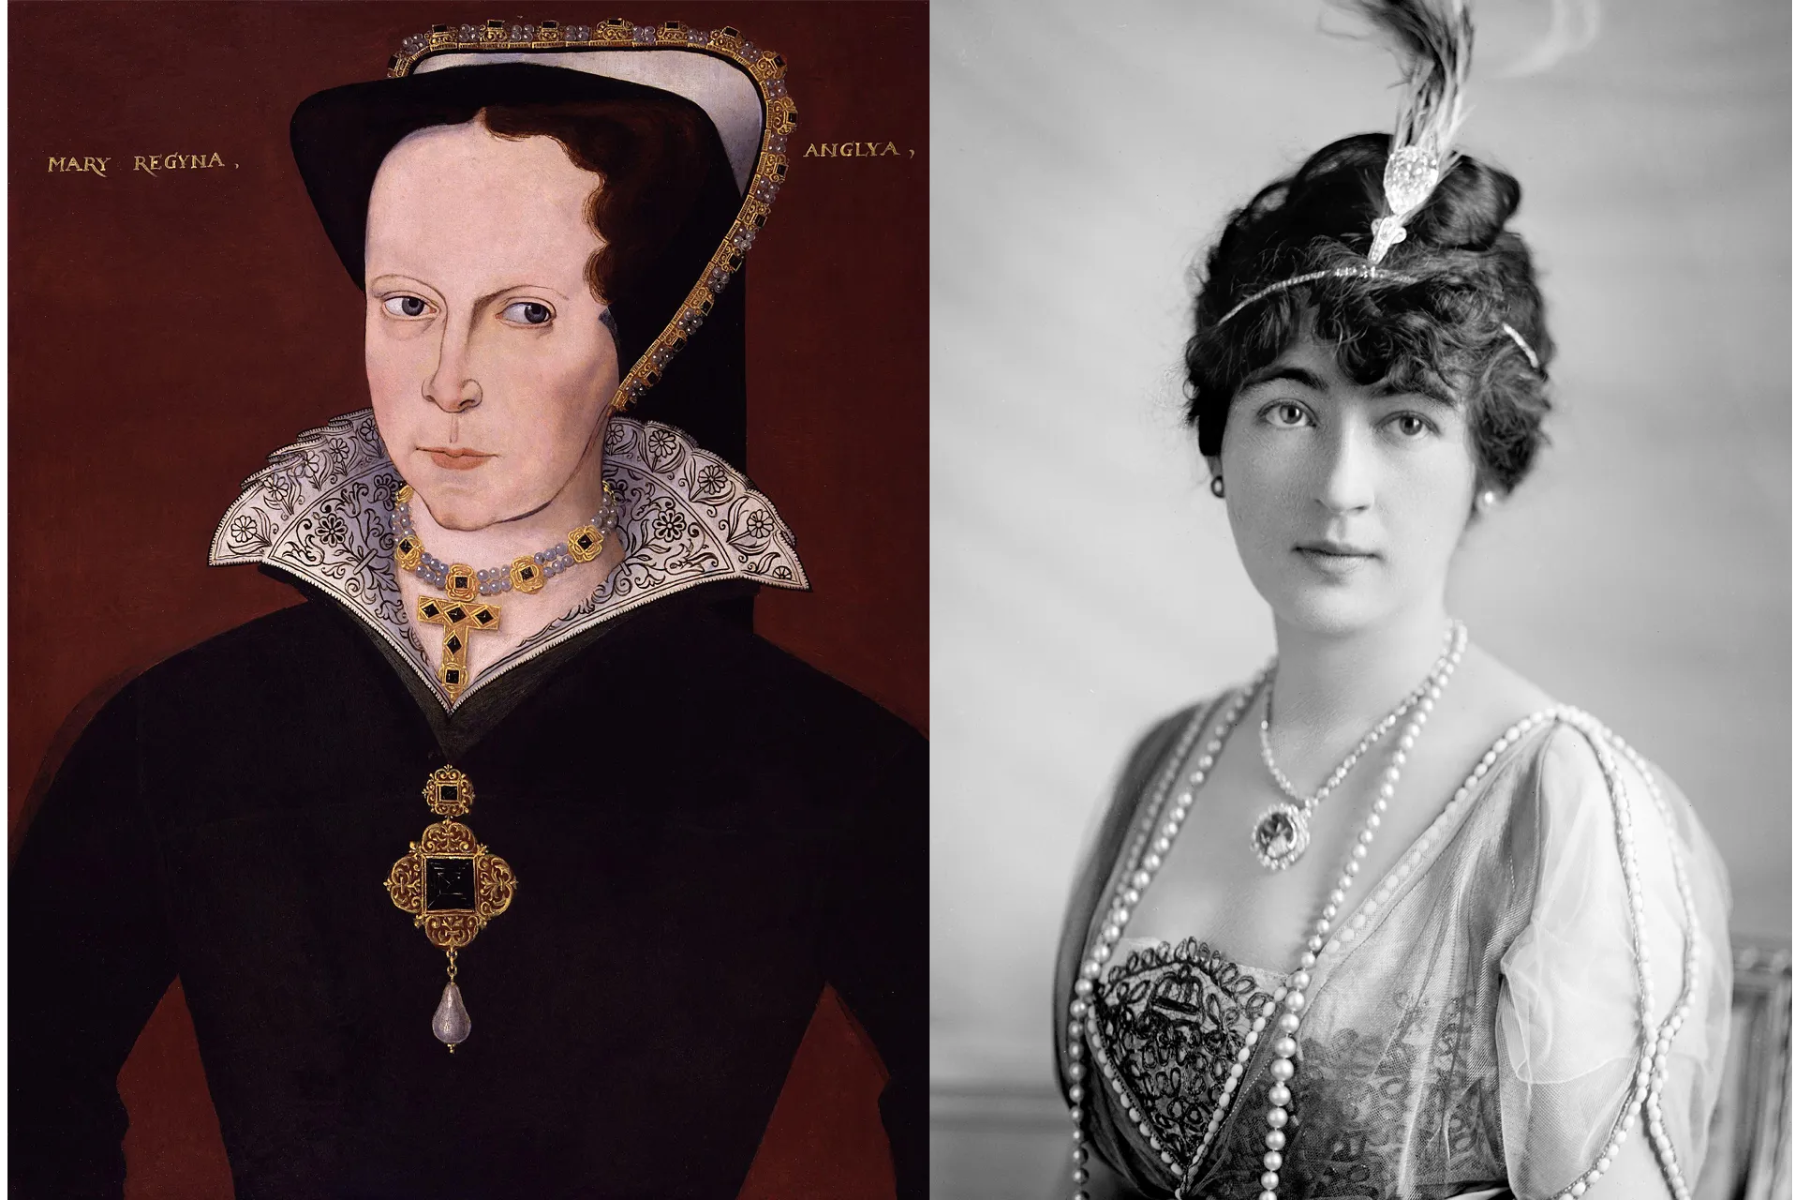 The Peregrina pearl worn by Queen Mary l and the cursed hope diamond worn by heiress Evalyn Walsh McLean